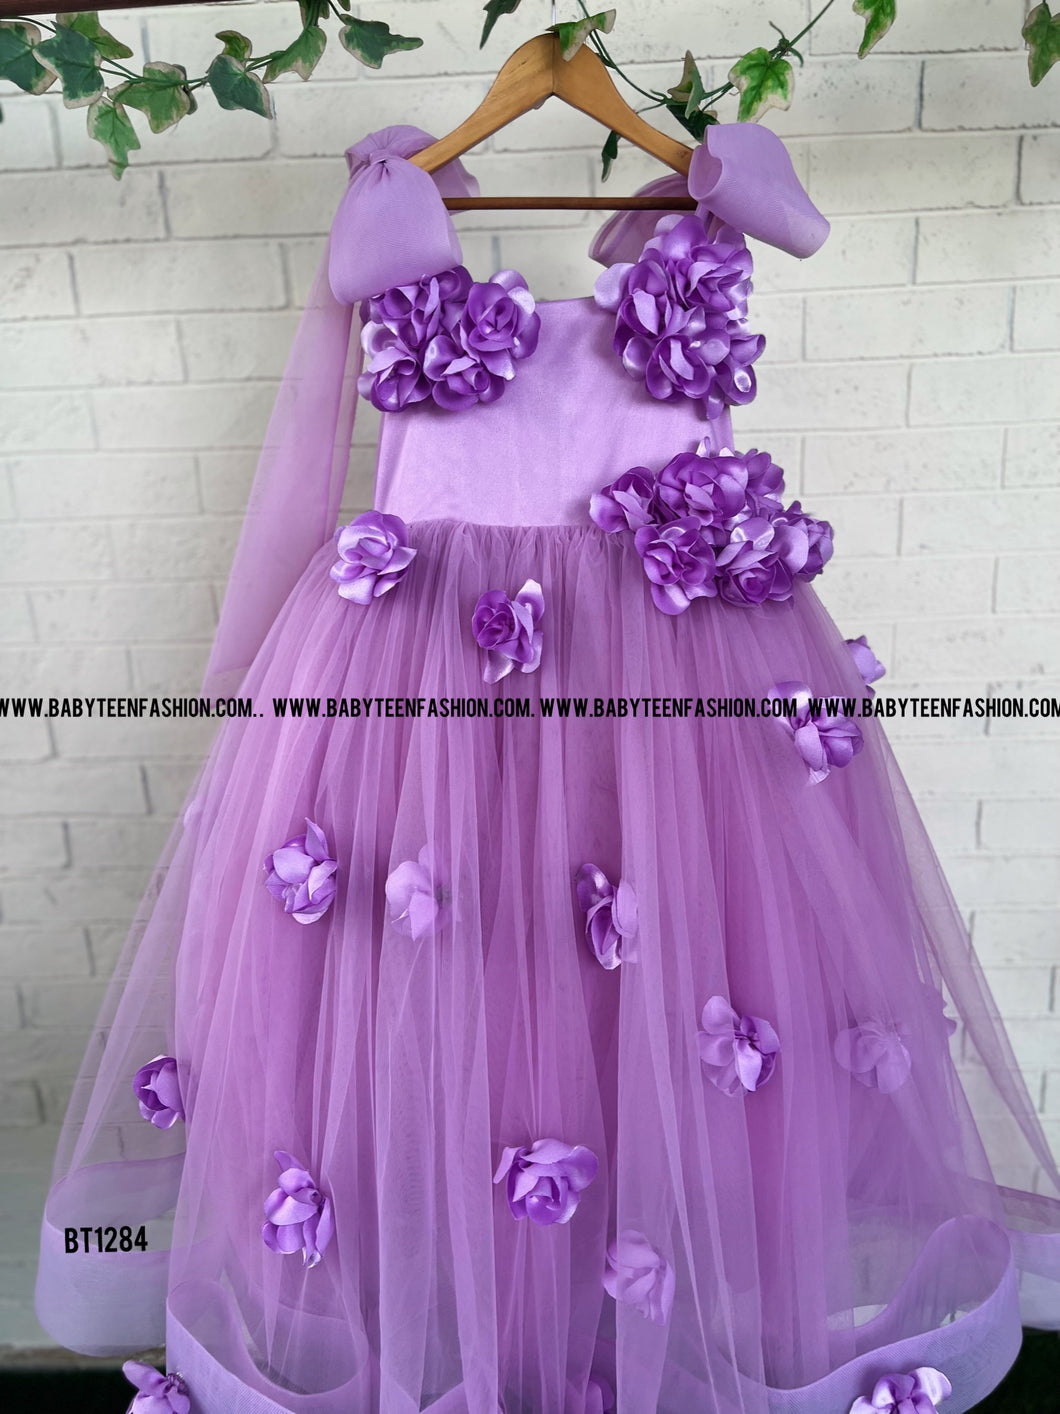 BT1284 Flower Theme Lavender Gown for Baby and Teenage Girls